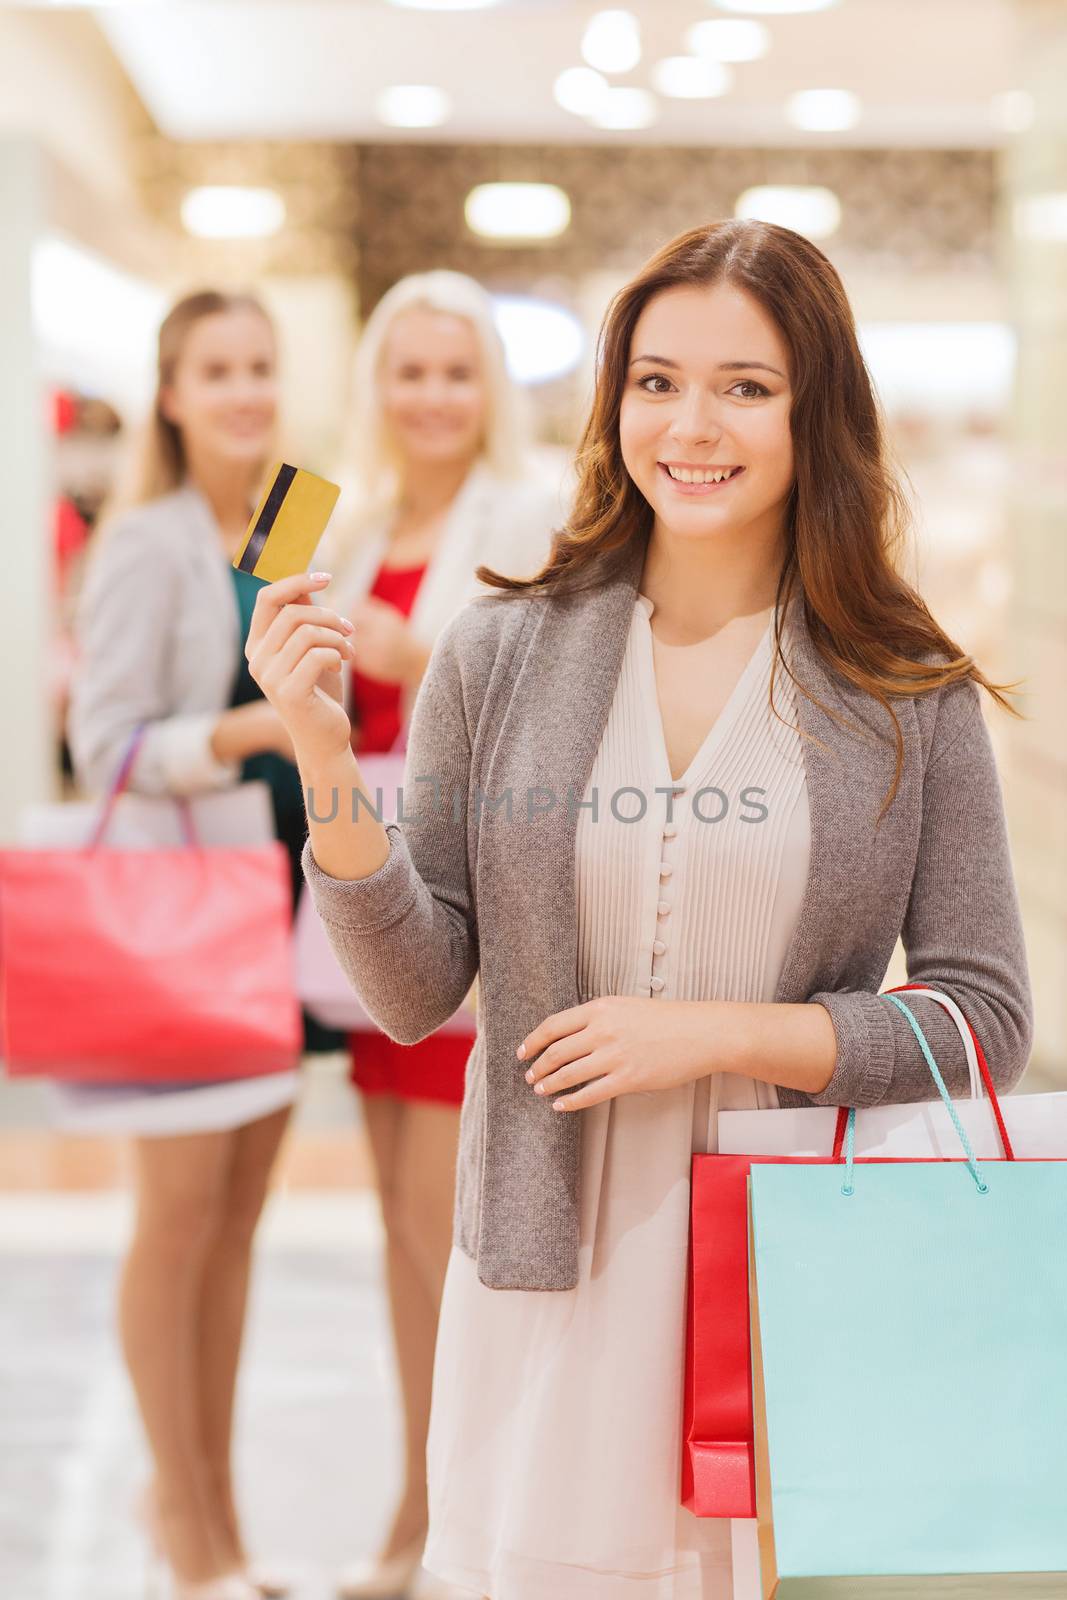 sale, consumerism, money and people concept - happy young women with shopping bags and credit card in mall